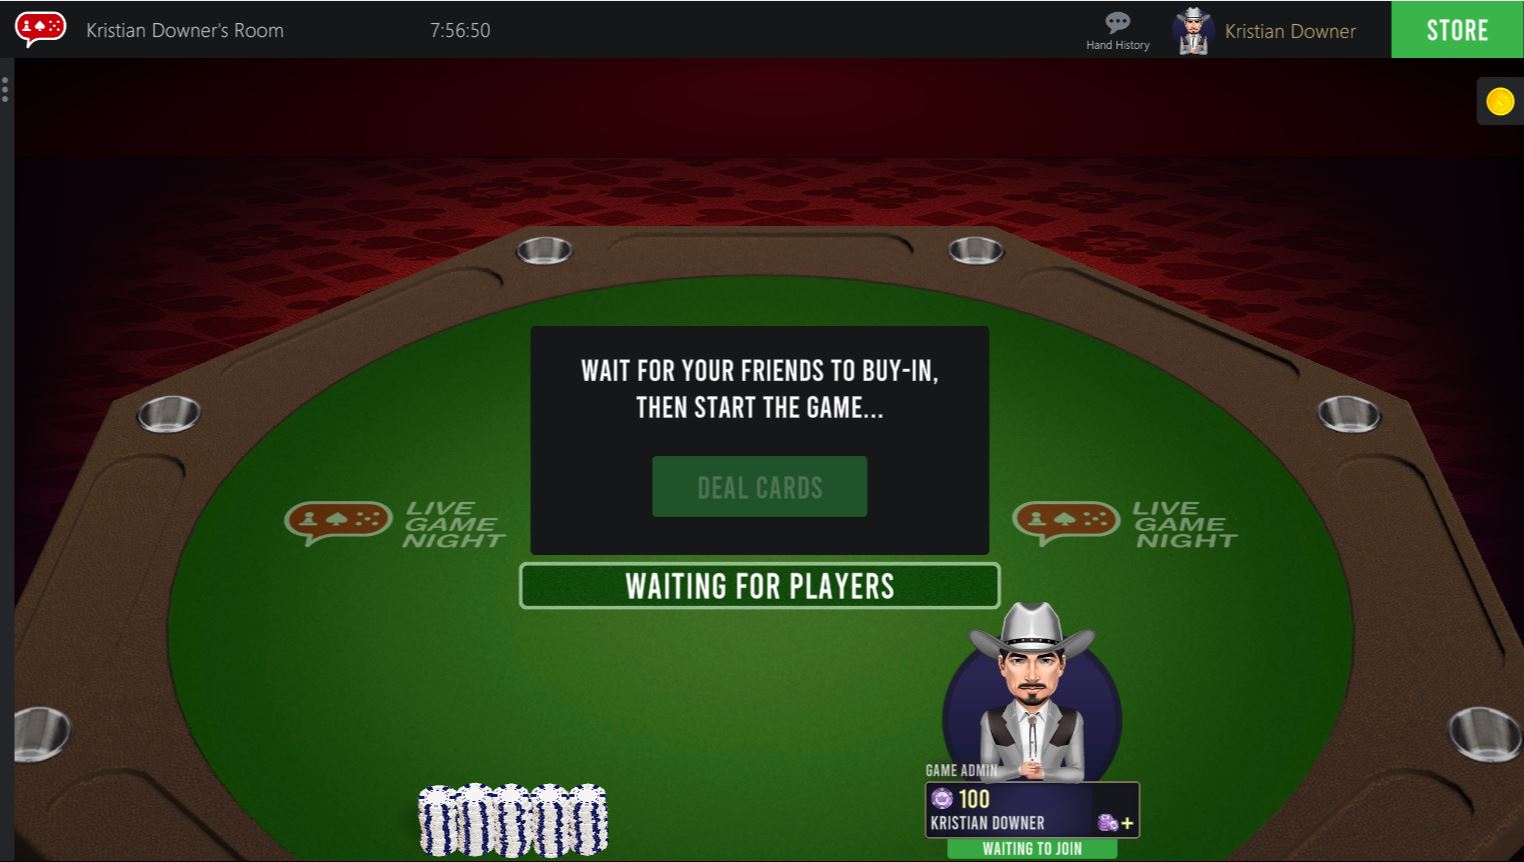 You can now play Poker on Zoom